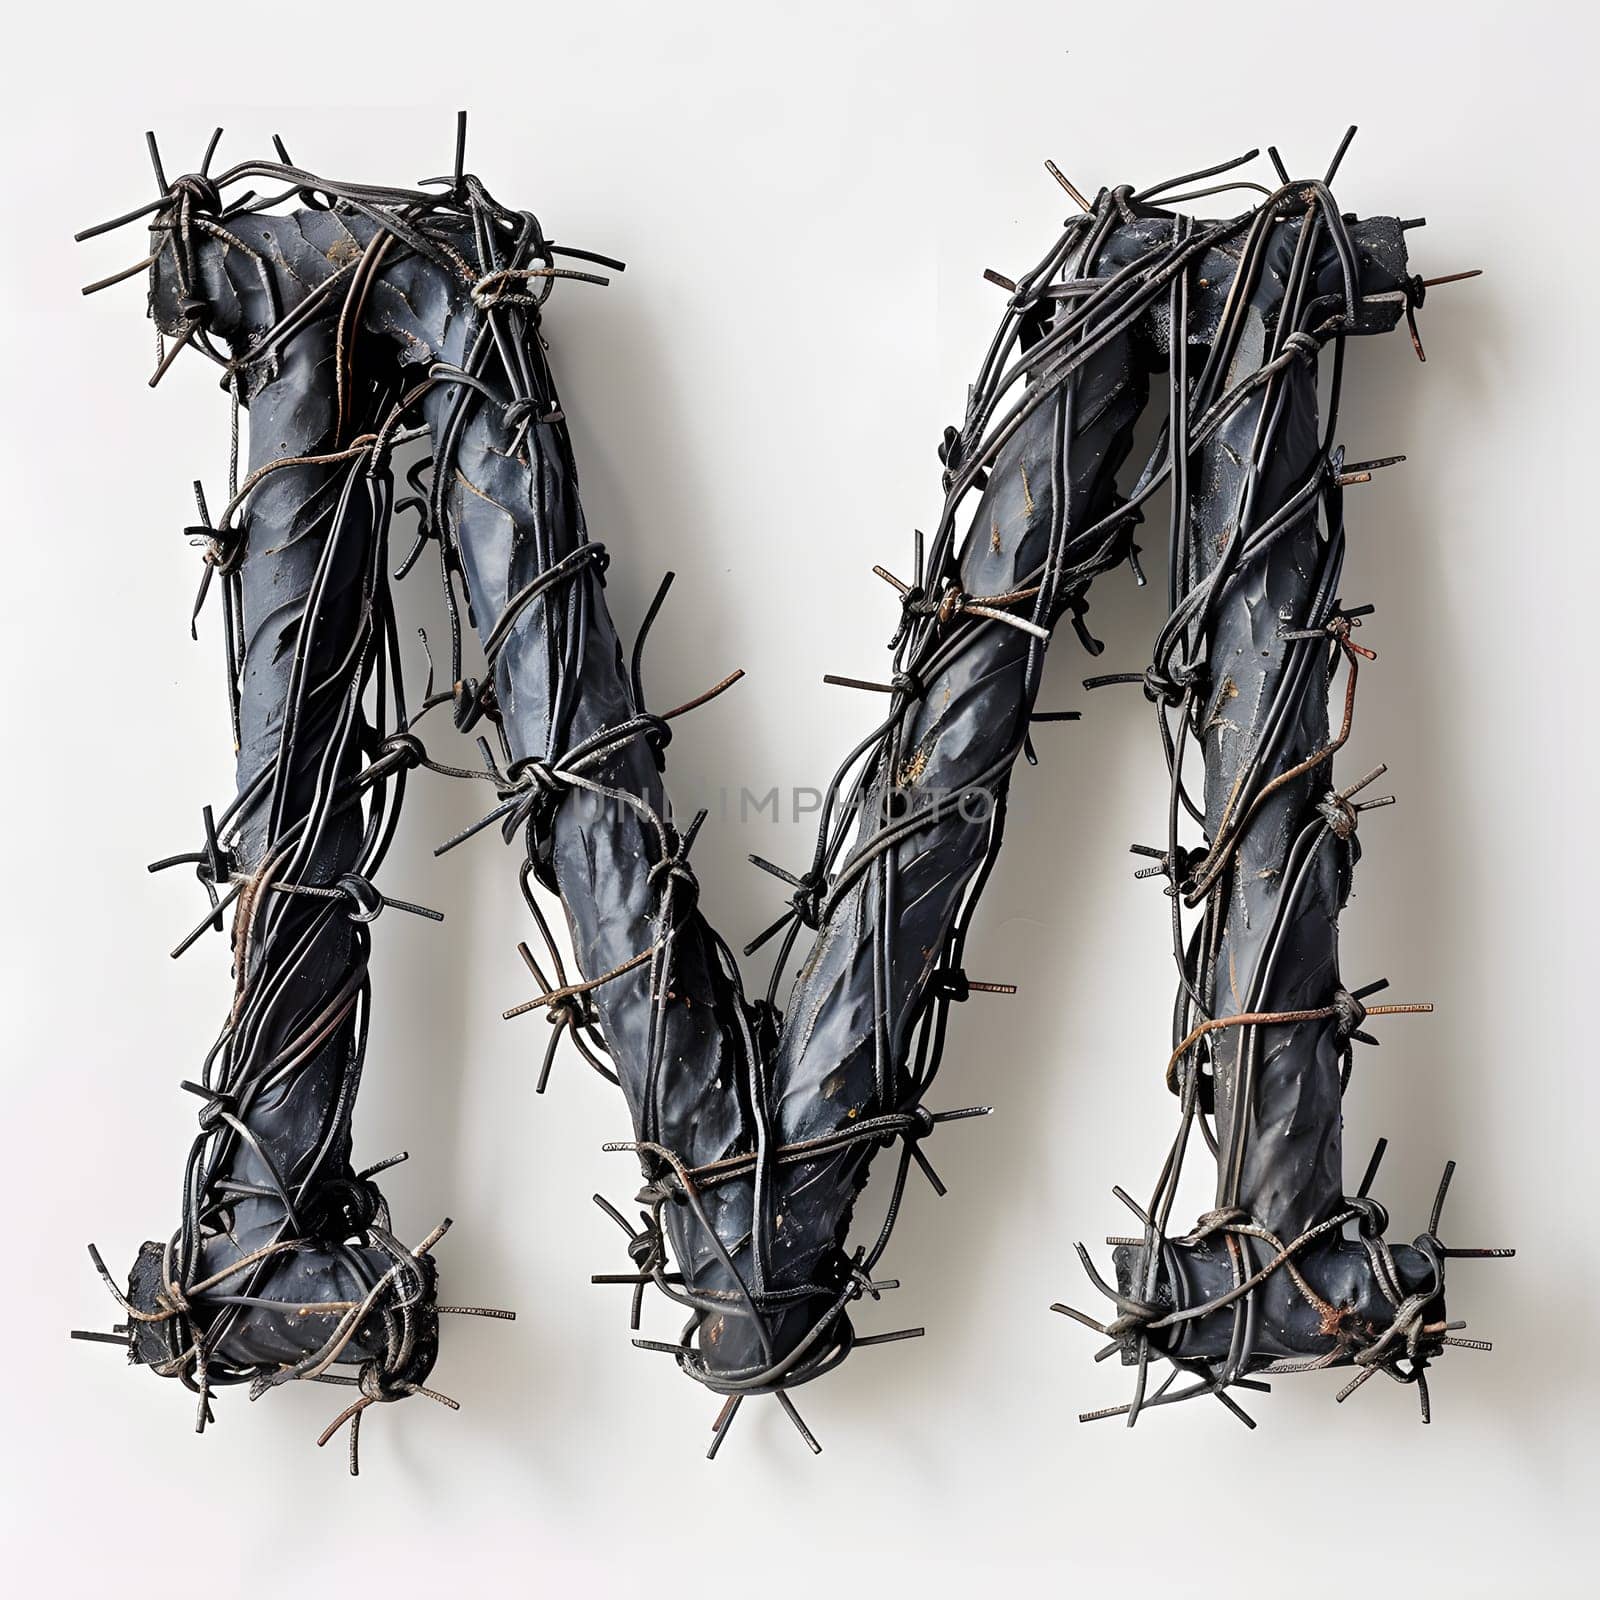 the letter m is made out of barbed wire by Nadtochiy